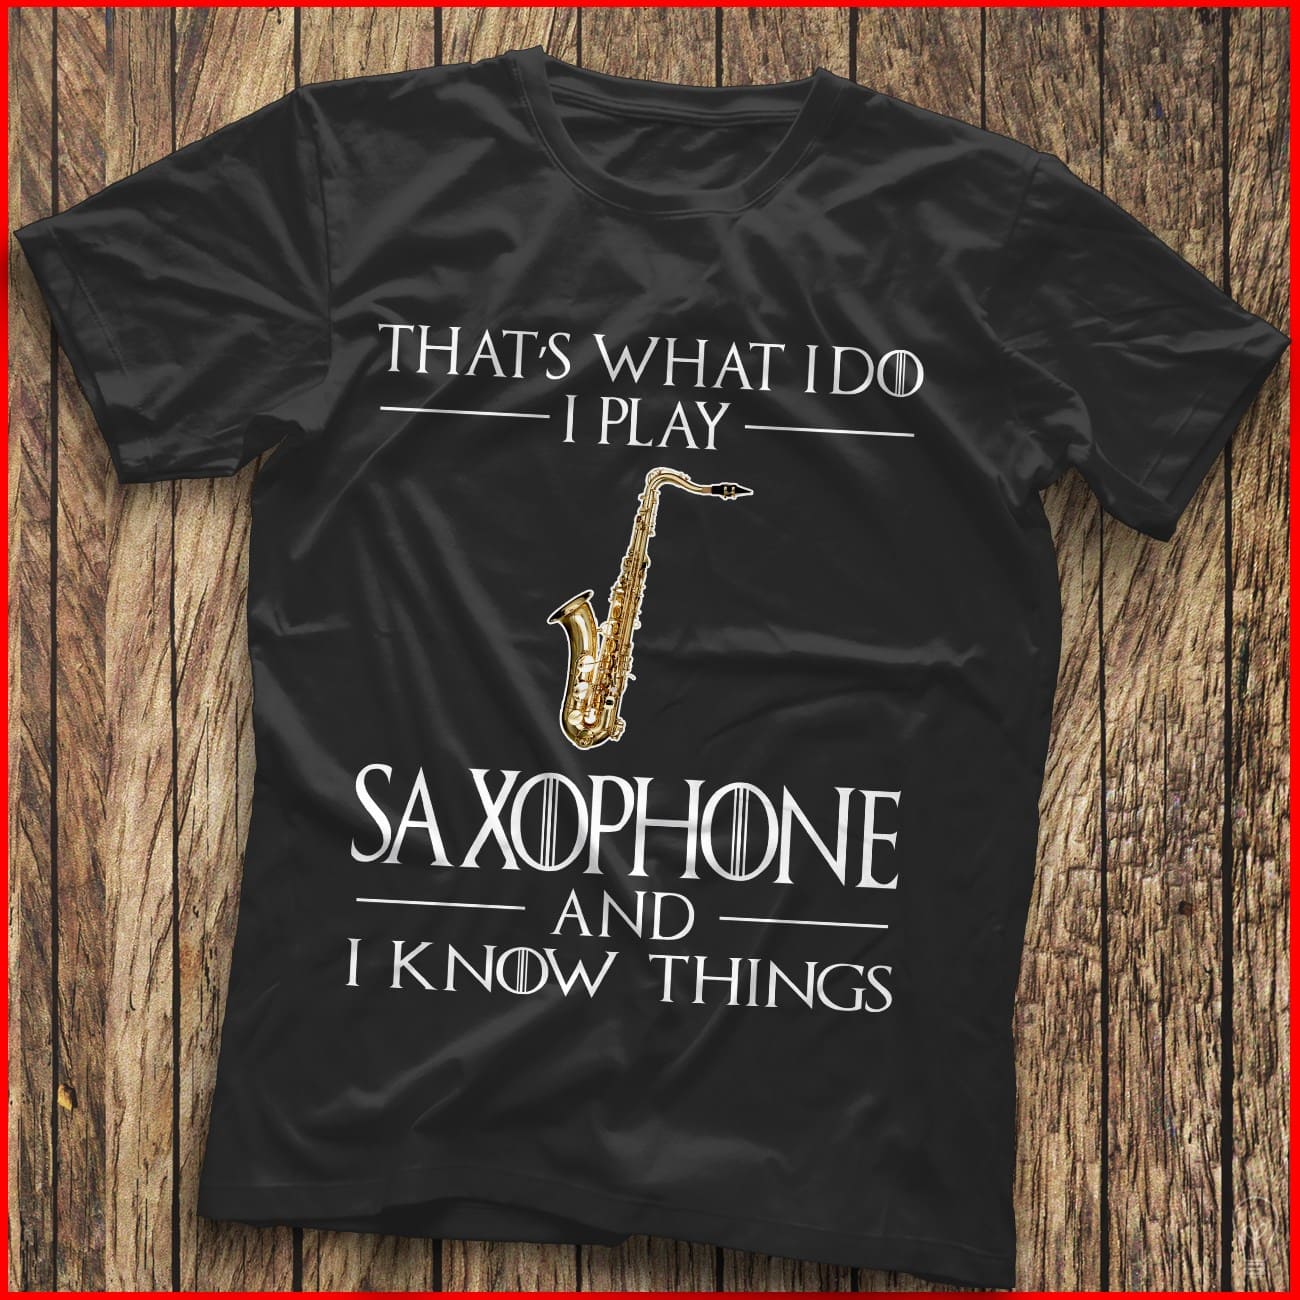 That's what I do I play saxophone and I know things - Saxophone the instrument